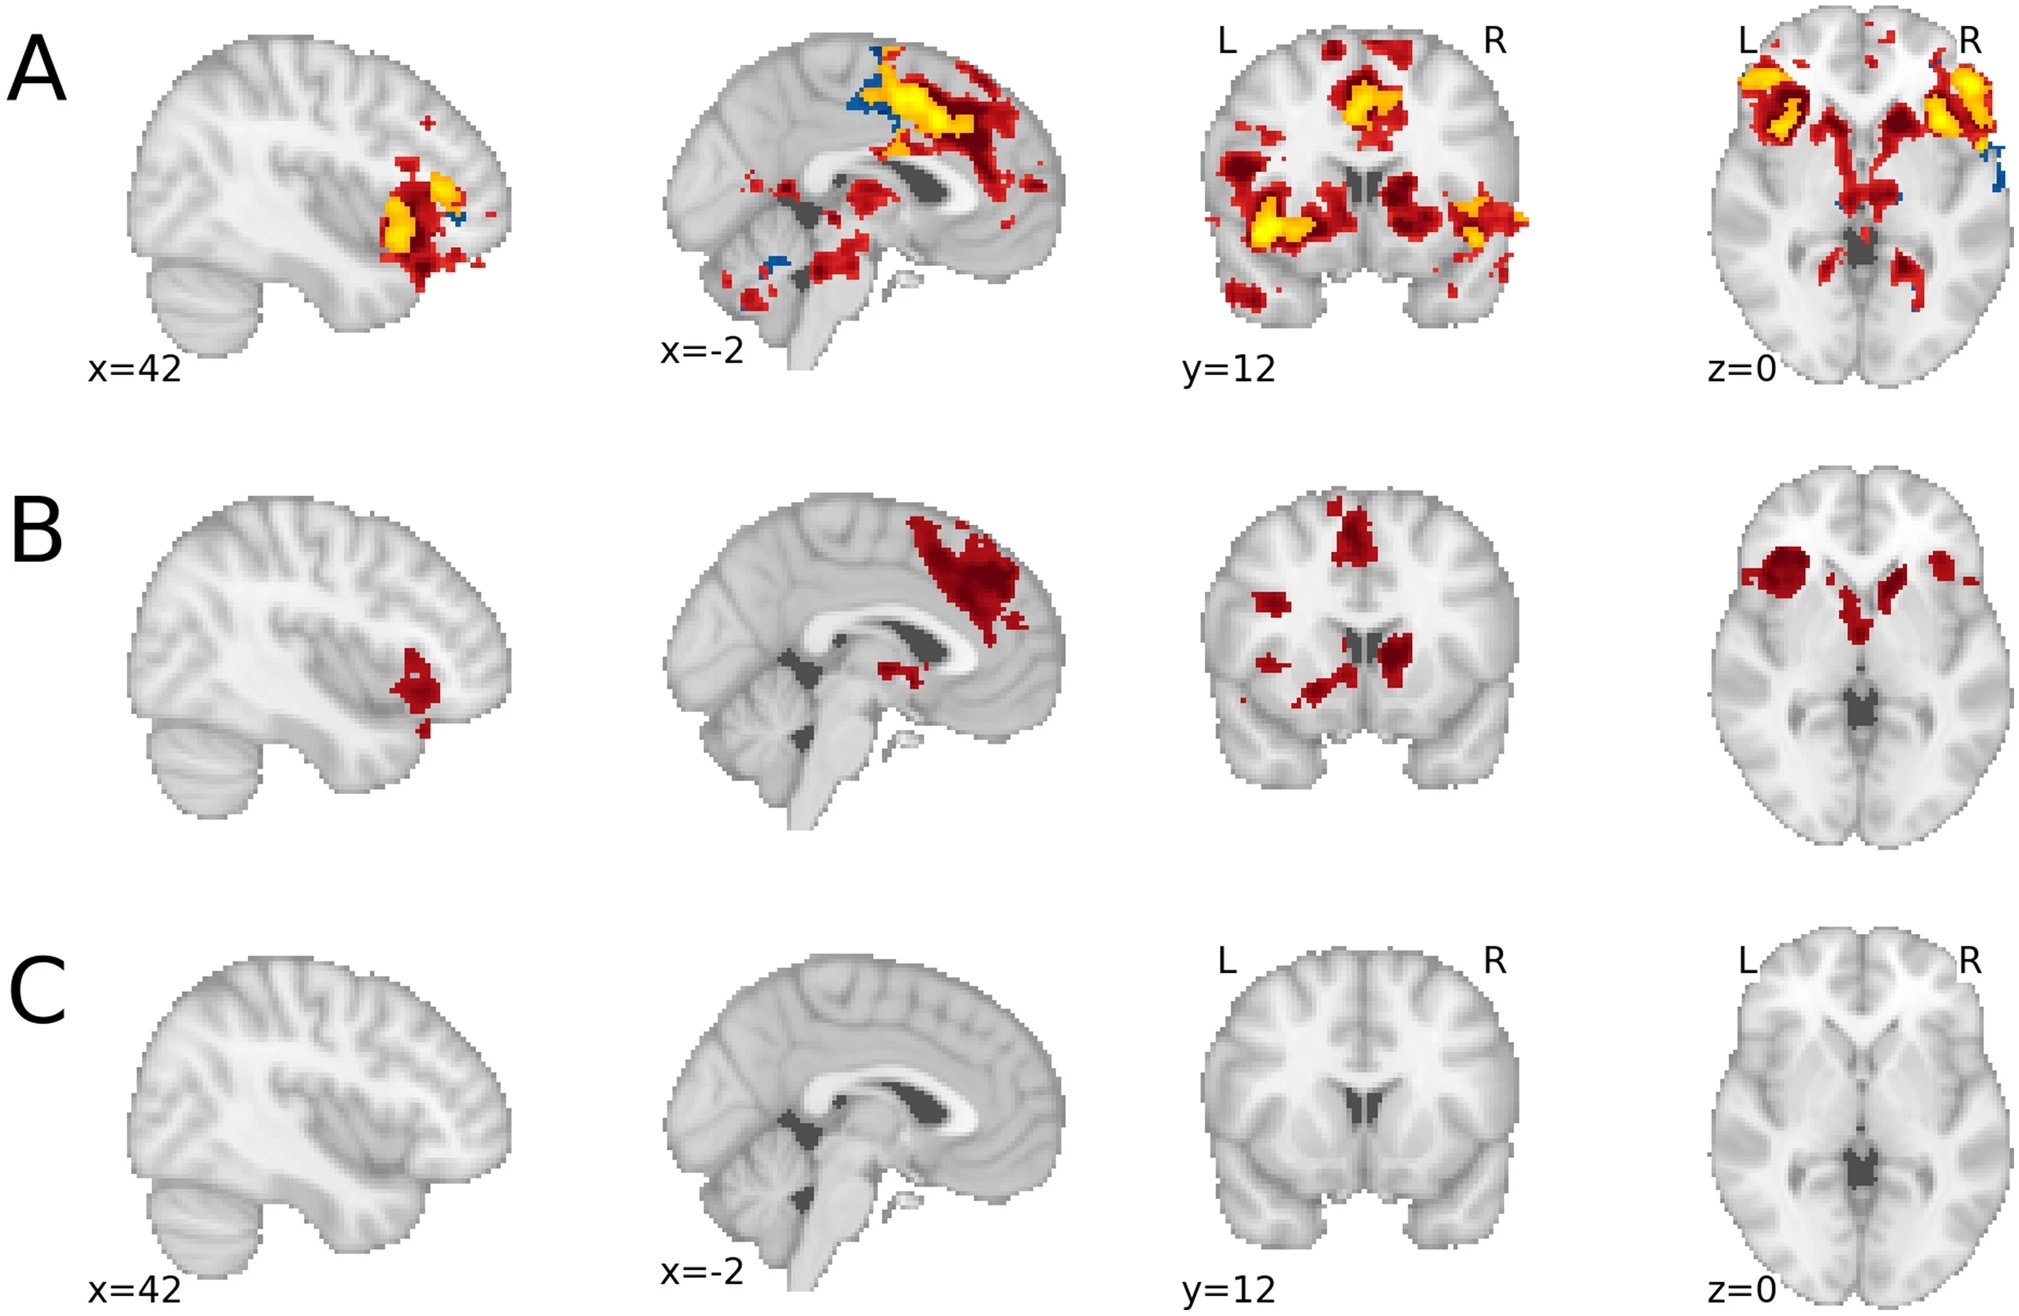 Results of the exploratory whole-brain analyses for the induction phase: (A) the contrast negativeactive>passive (red), positiveactive>passive (blue), and their conjunction (yellow); (B) the contrast negativeactive>passive > positiveactive>passive; (C) the contrast positiveactive>passive > negativeactive>passive (empty).